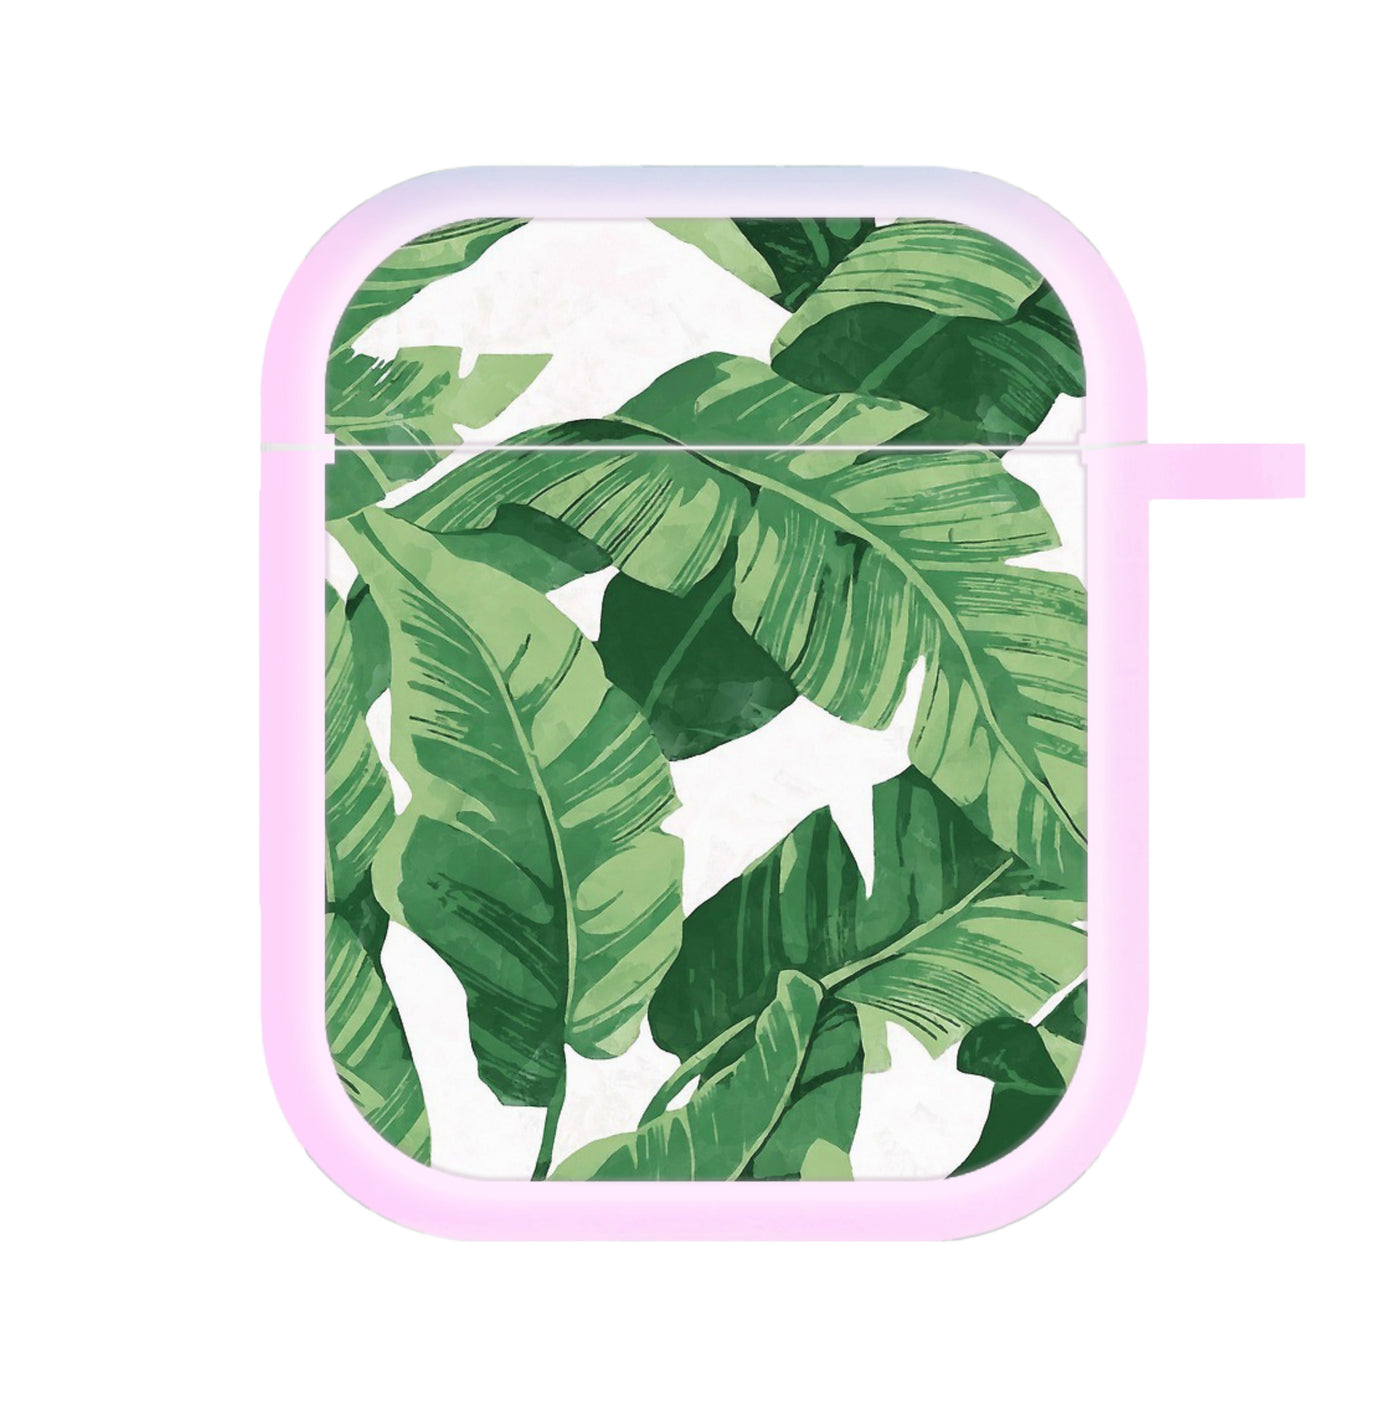 Tropical Banana Leaf Pattern AirPods Case